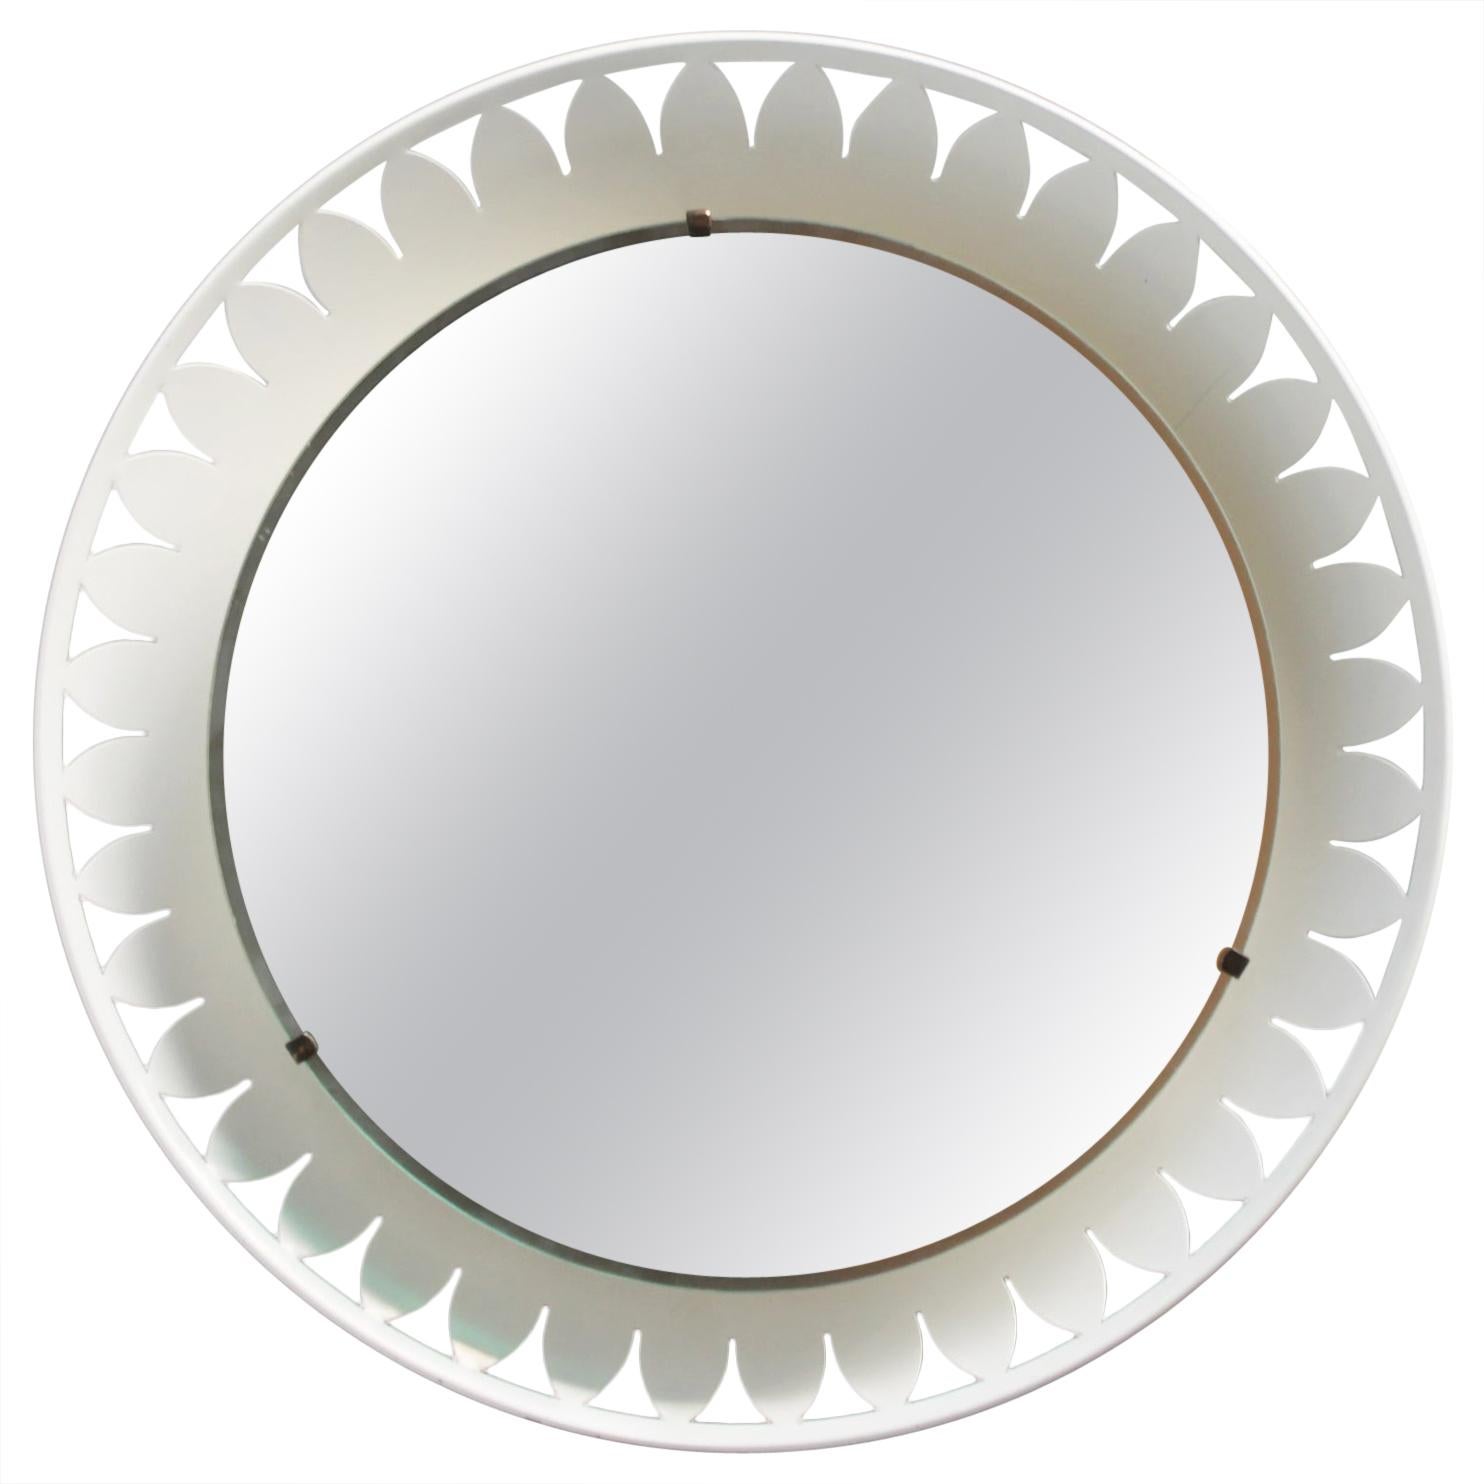 Flower-Shaped Illuminated Mirror by Ernest Igl for Hillebrand For Sale